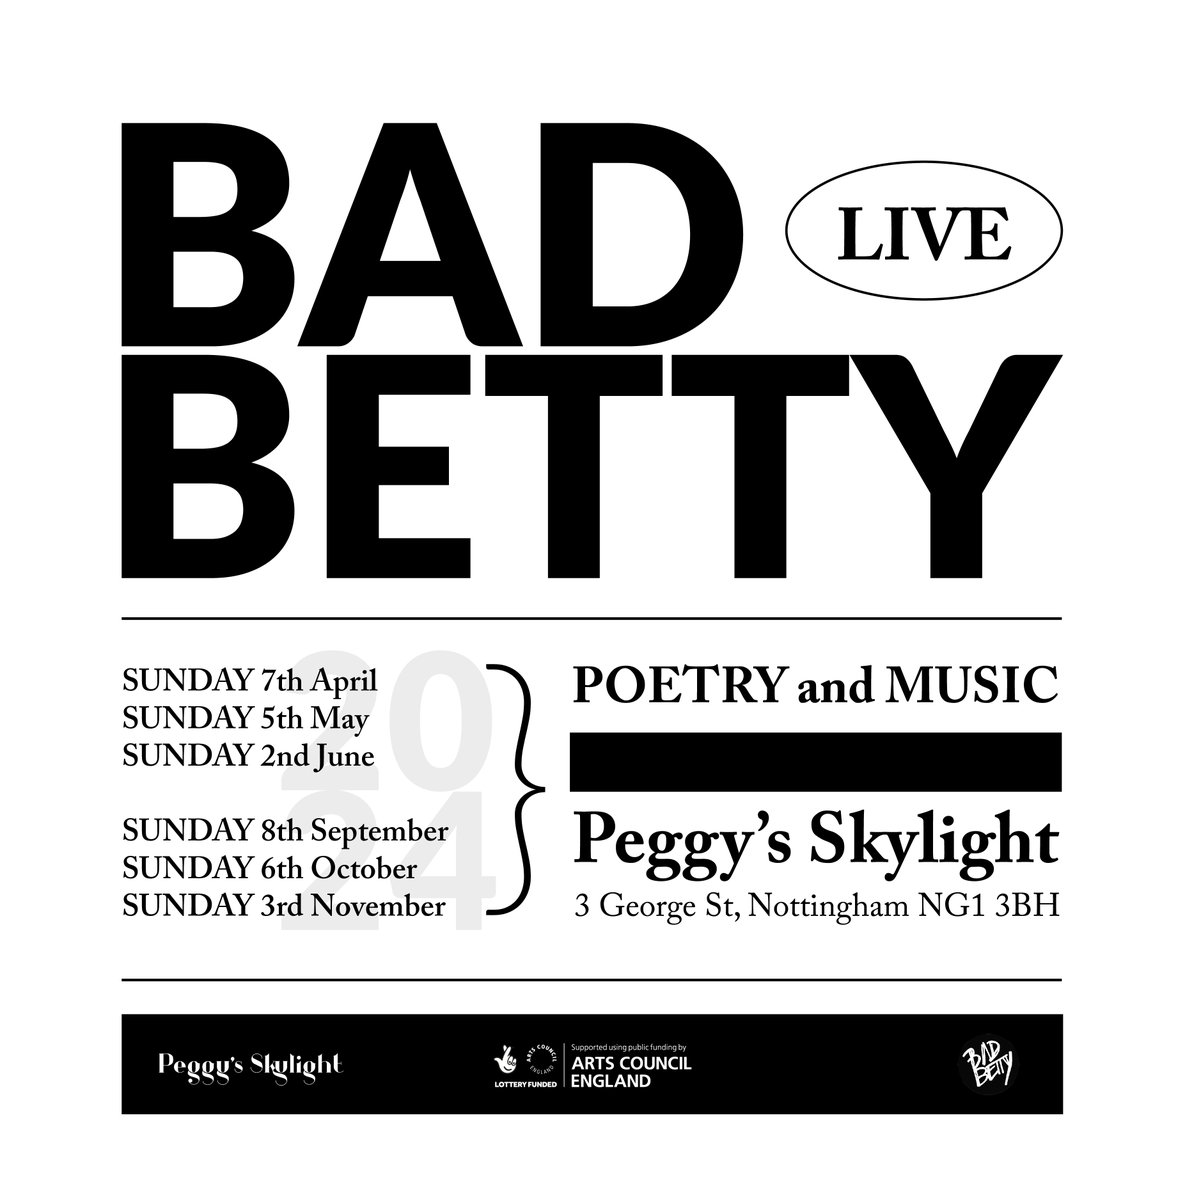 Tickets are flying out the door for Sunday's Bad Betty Live @peggysskylight so grab yrs while you can! And a heads-up that you can book for our May / June events now + workshops from @Vanessa_Kisuule @harrybakerpoet @Malikabooker 🔥🥰💫 Line-ups & links: badbettypress.com/events/